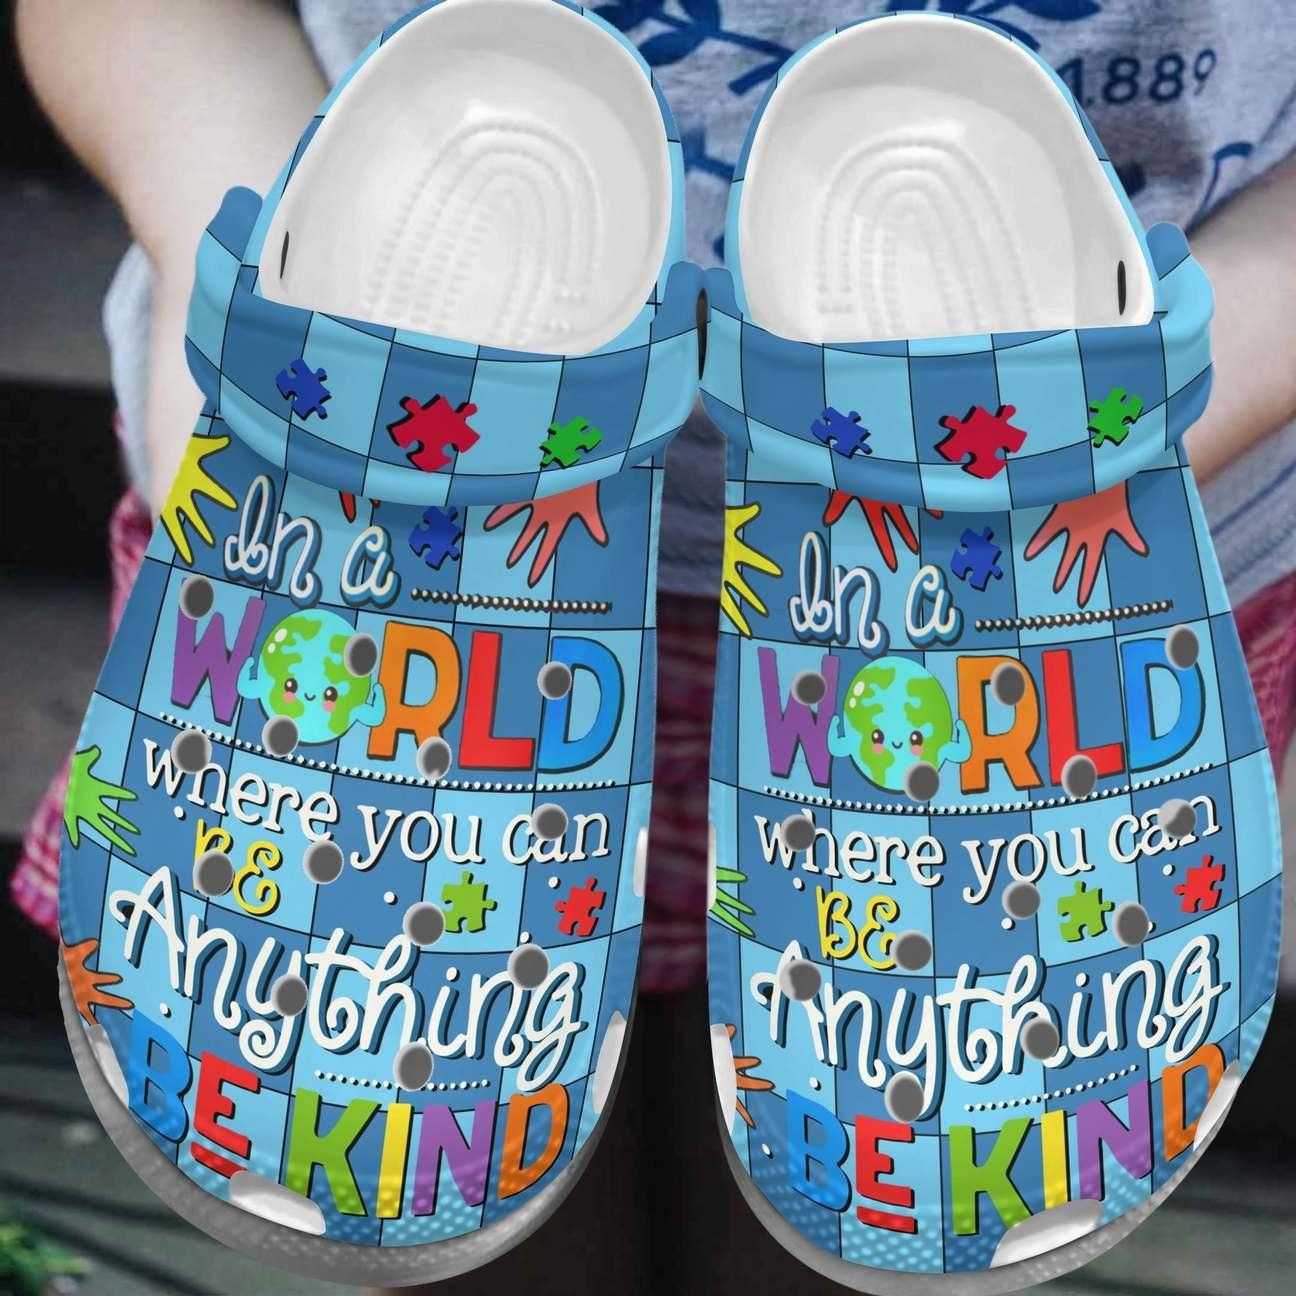 Autism Awareness Crocs In A World Where You Can Be Anything Be Kinb Crocband Clog Shoes For Men Women